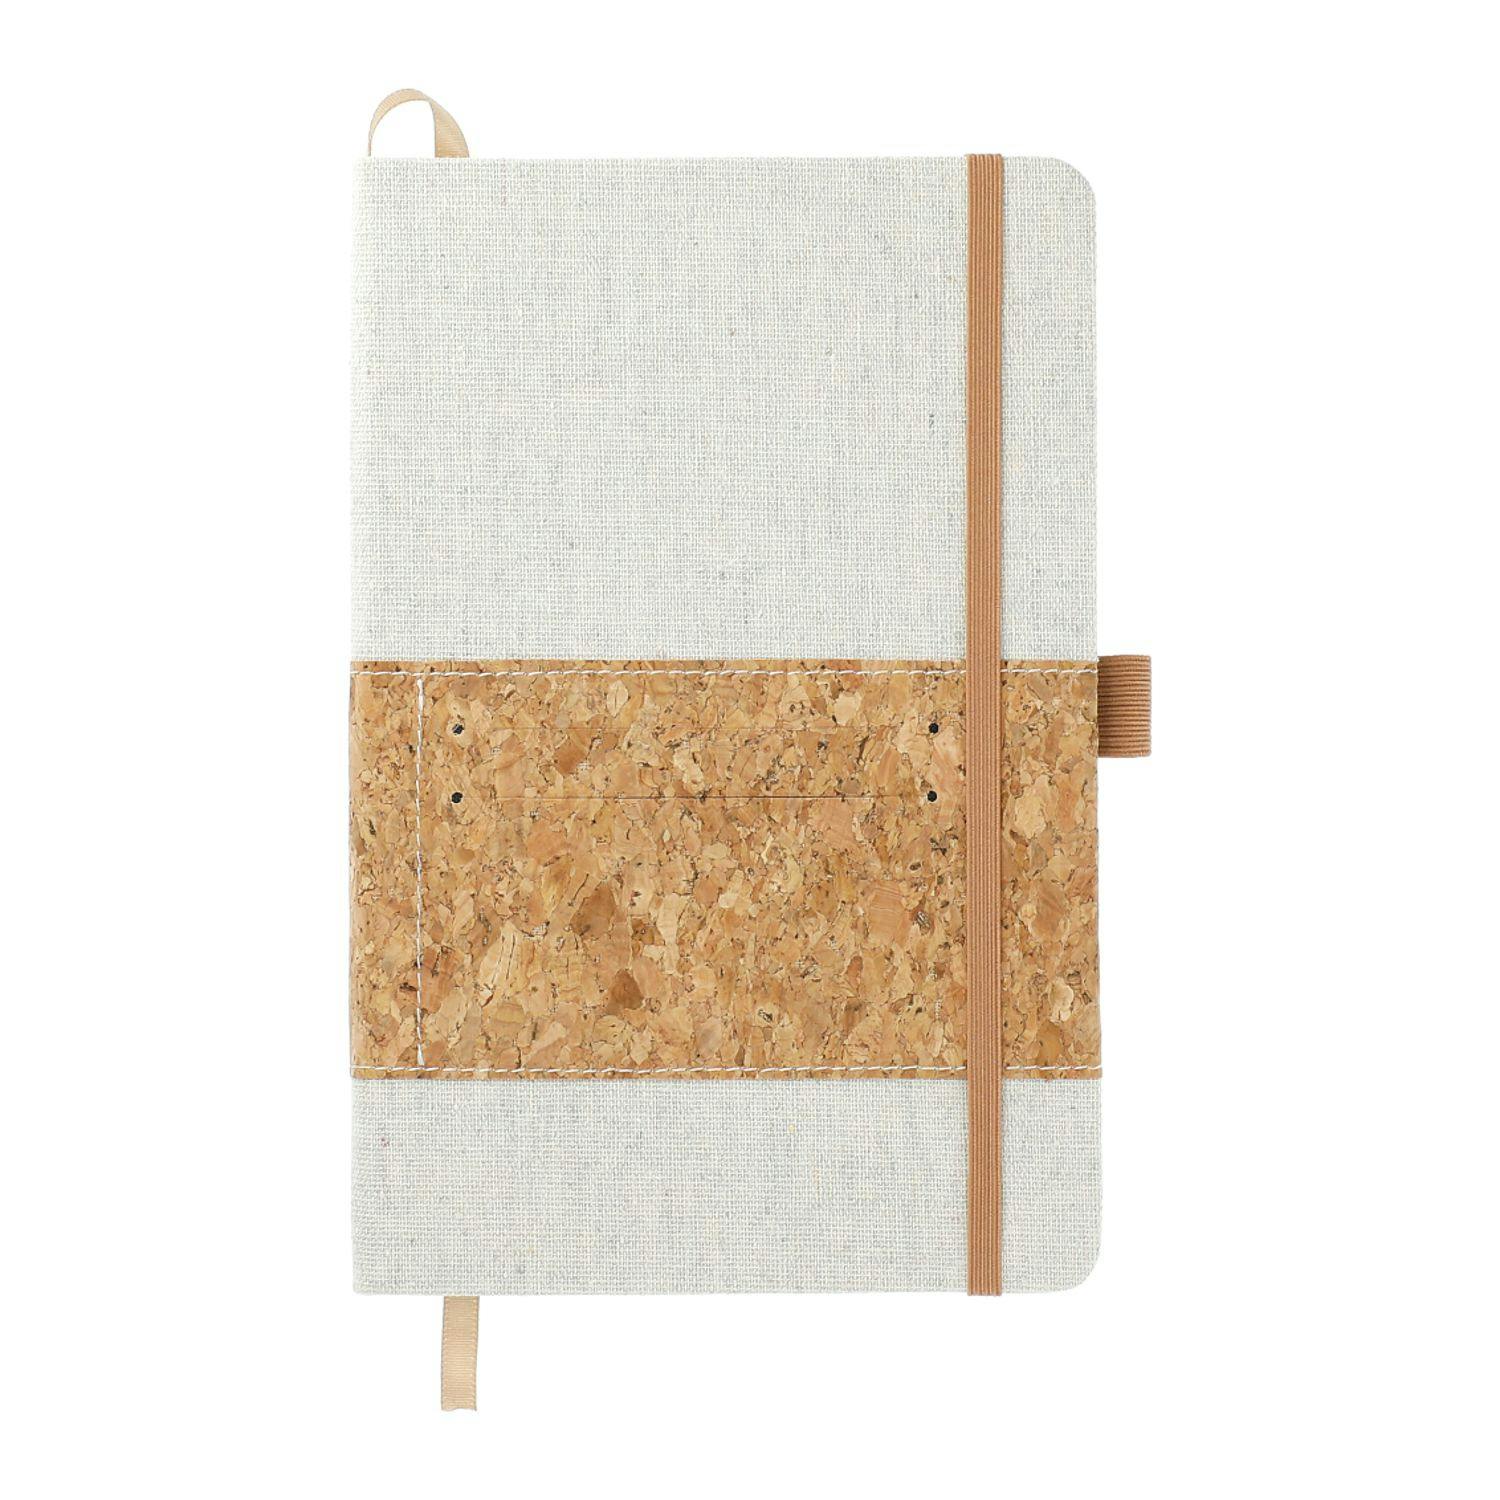 5.5" x 8.5" Recycled Cotton and Cork Bound Notebook - additional Image 1